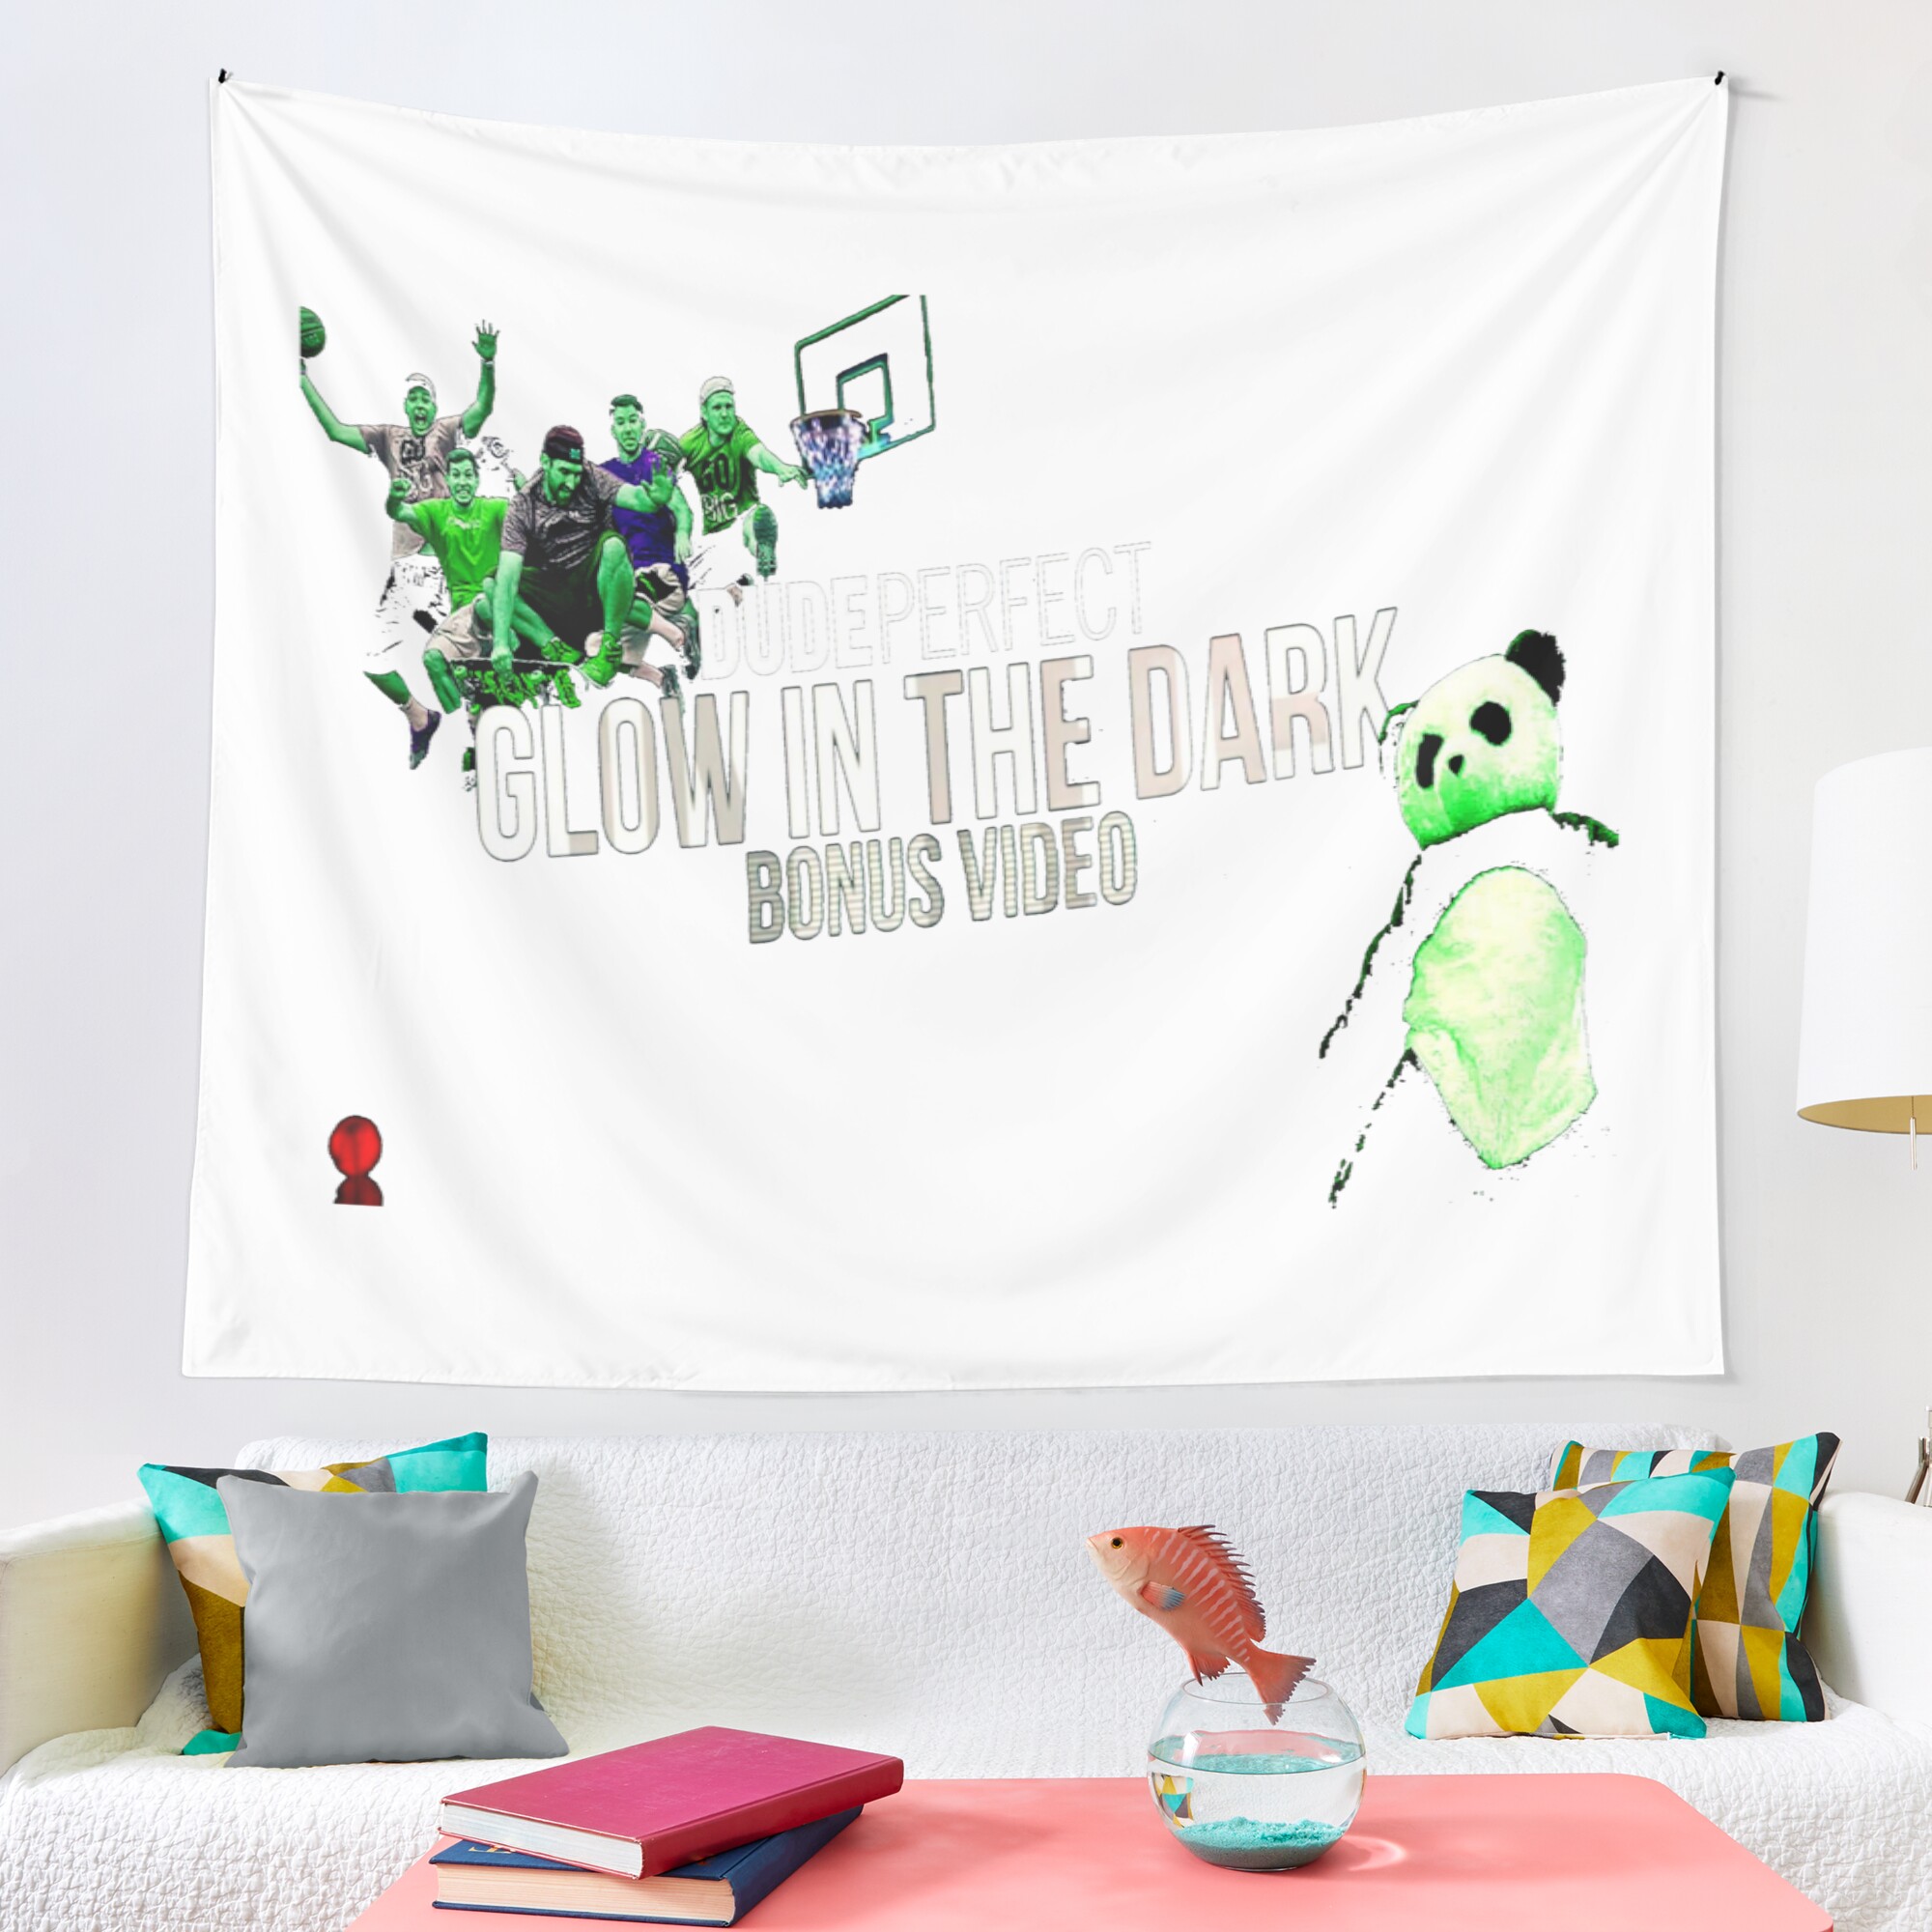 urtapestry lifestyle largesquare2000x2000 7 - Dude Perfect Merch